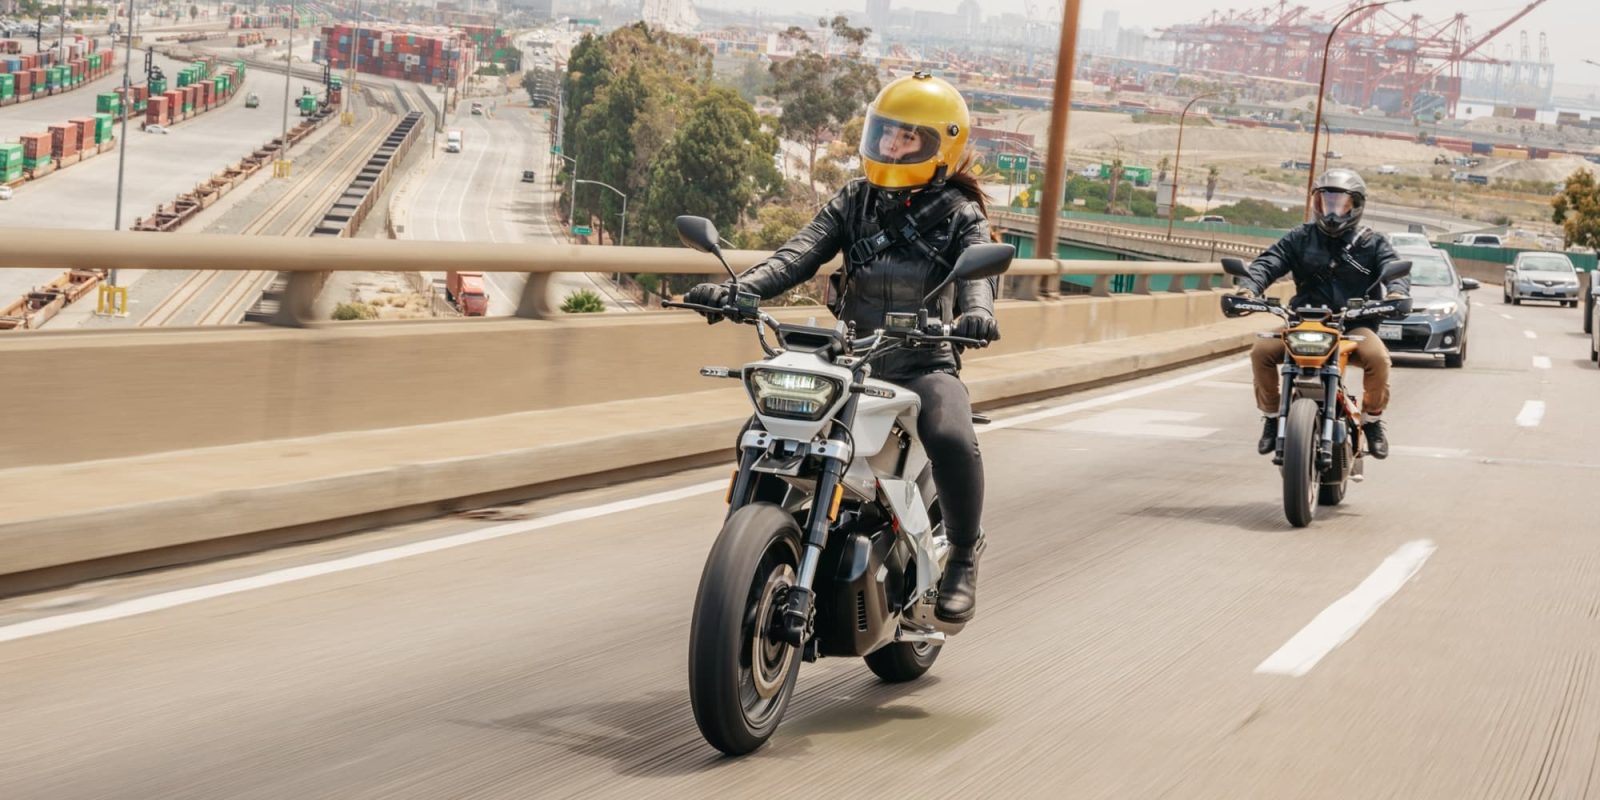 Ryvid Anthem launched as lower cost 75 MPH electric motorcycle in the US